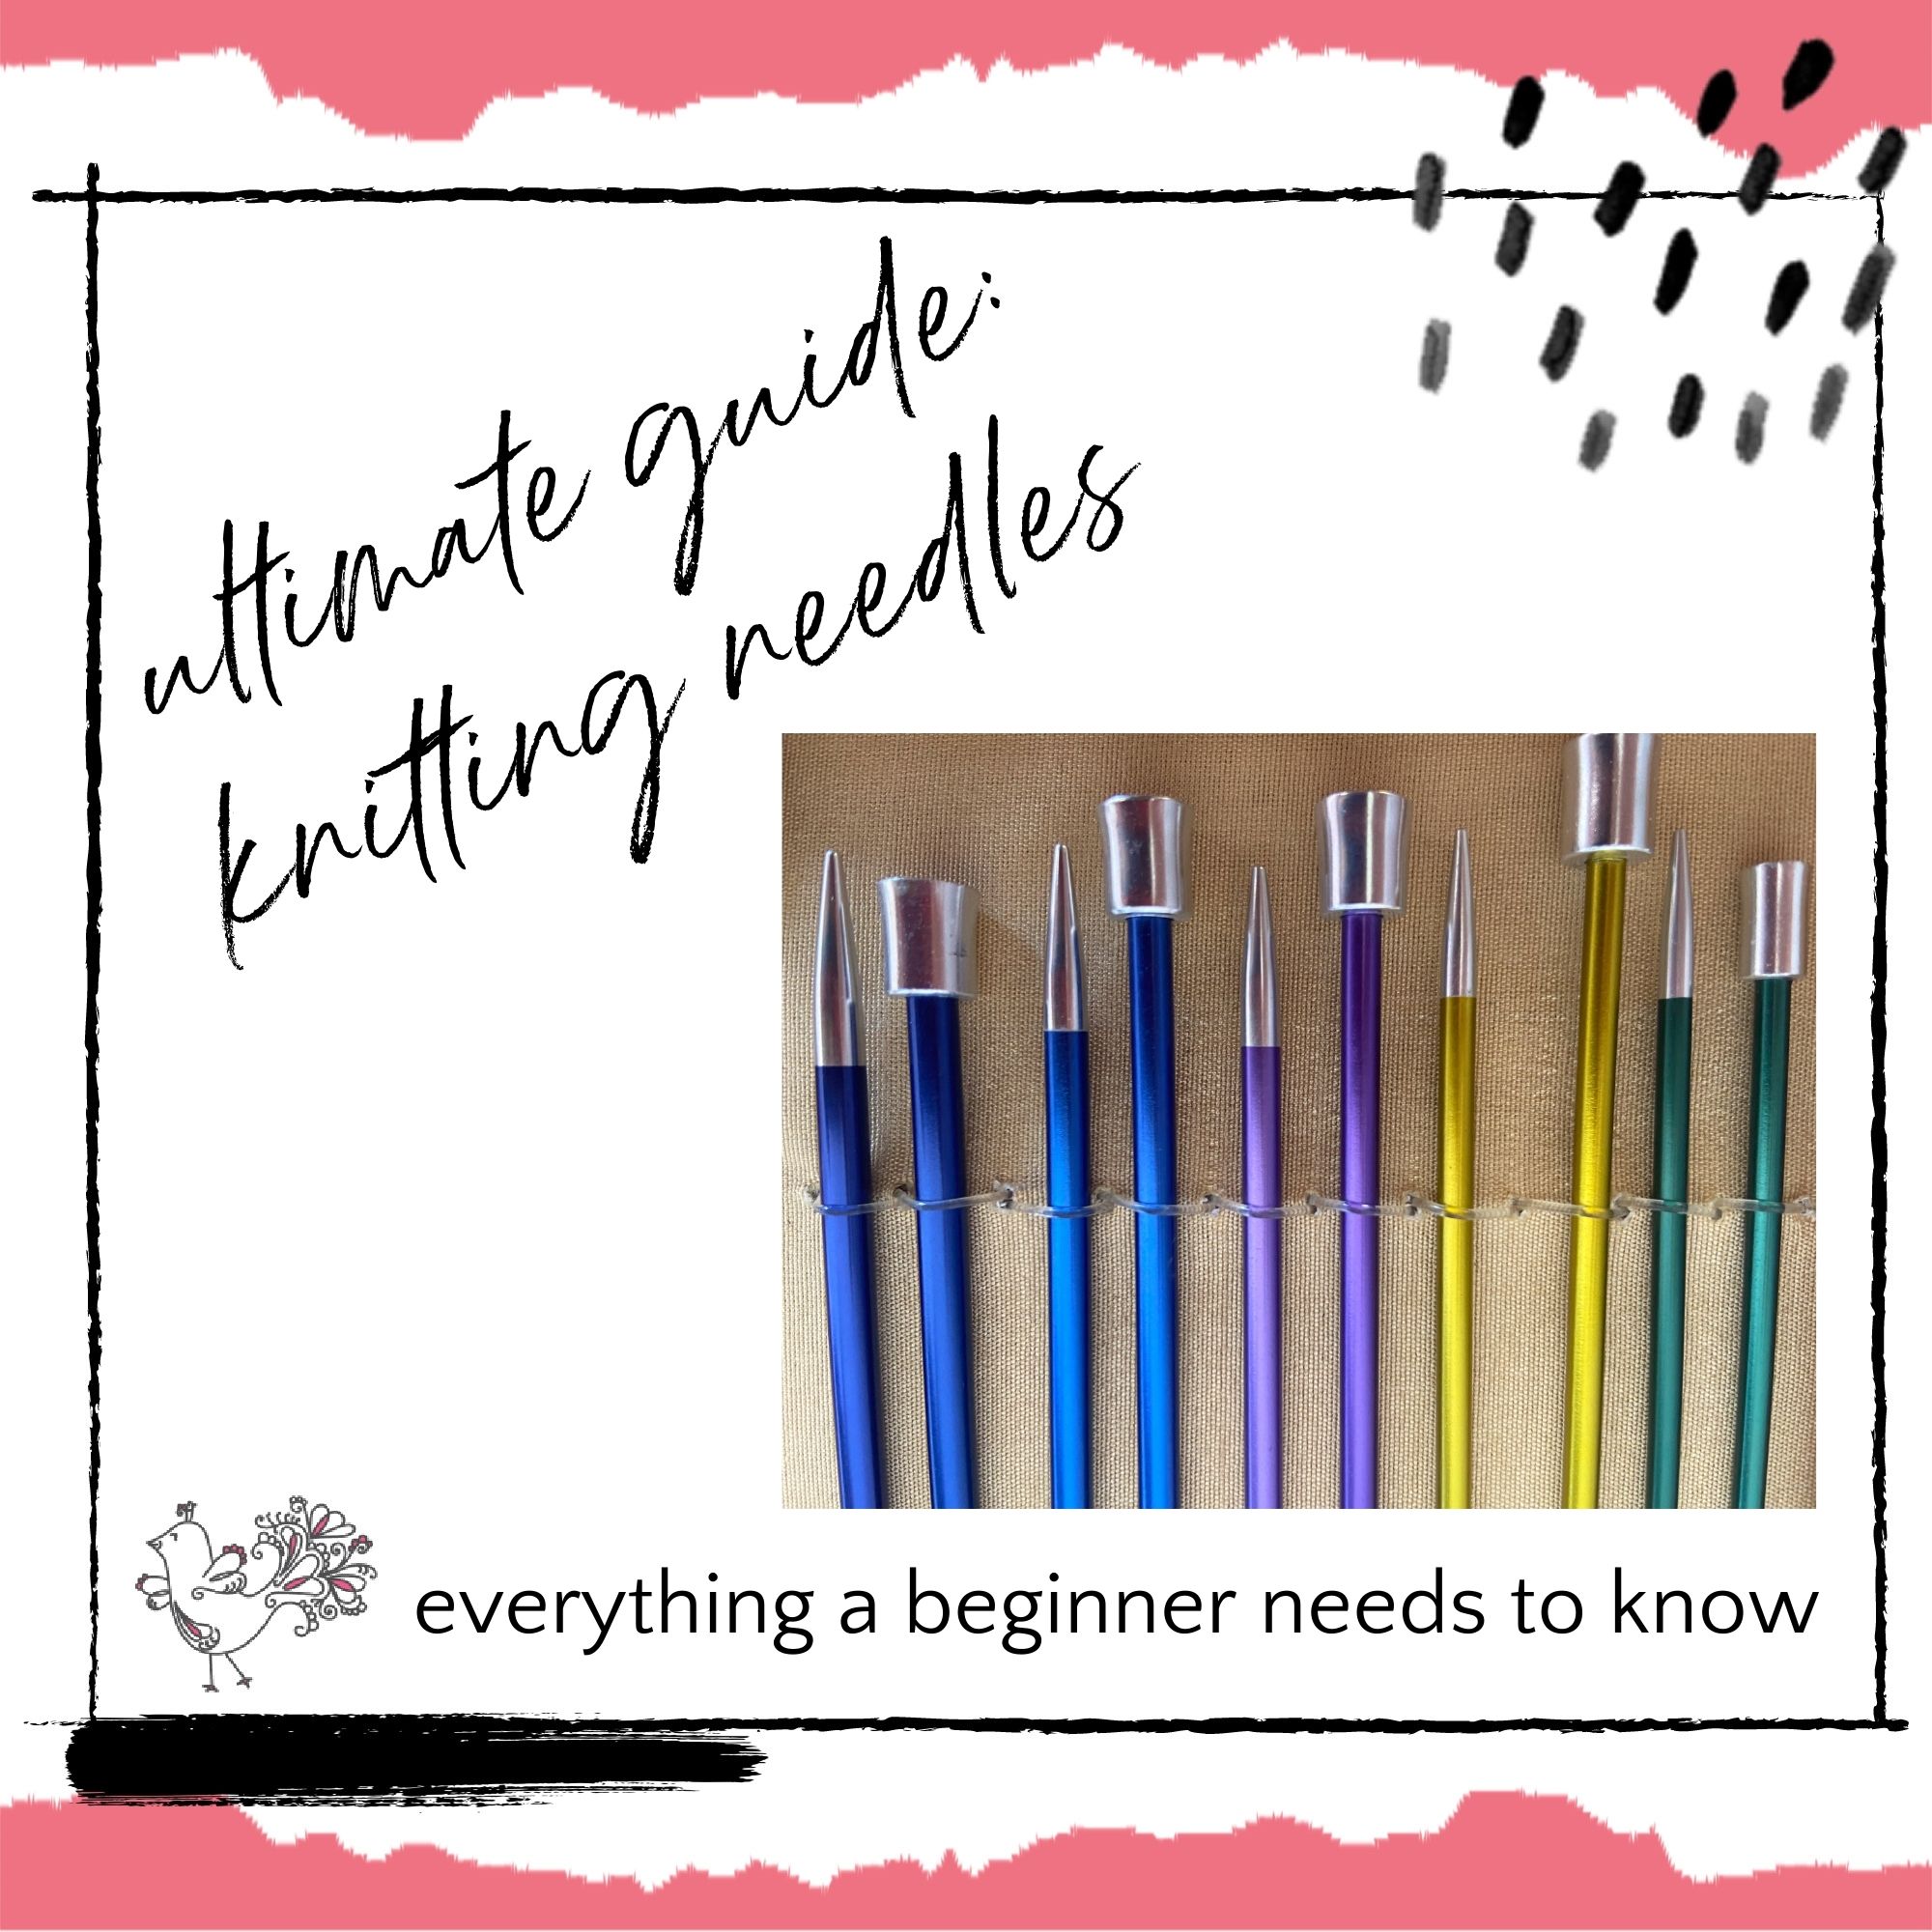 6 types of knitting needles with names and Uses with written